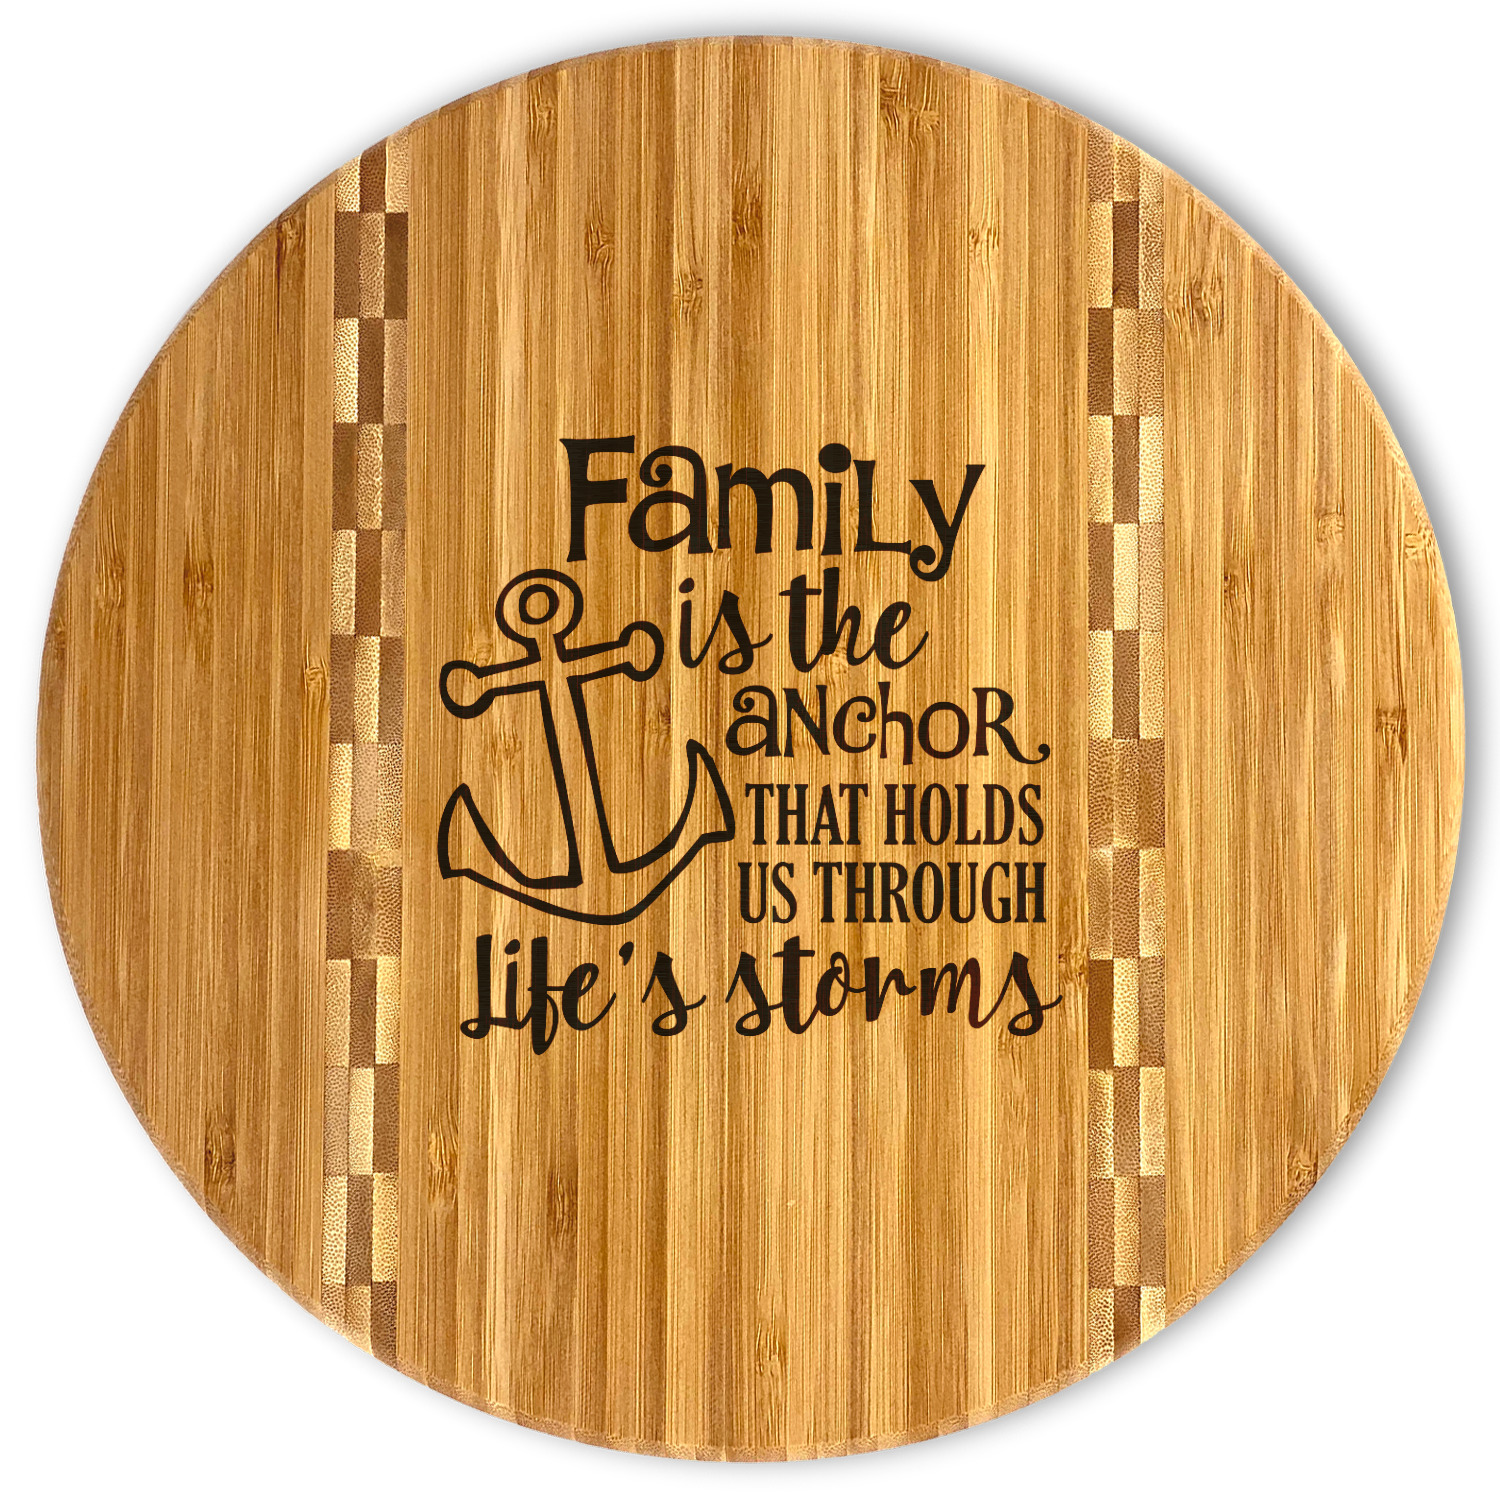 https://www.youcustomizeit.com/common/MAKE/1038129/Family-Quotes-and-Sayings-Bamboo-Cutting-Boards-FRONT.jpg?lm=1658265586